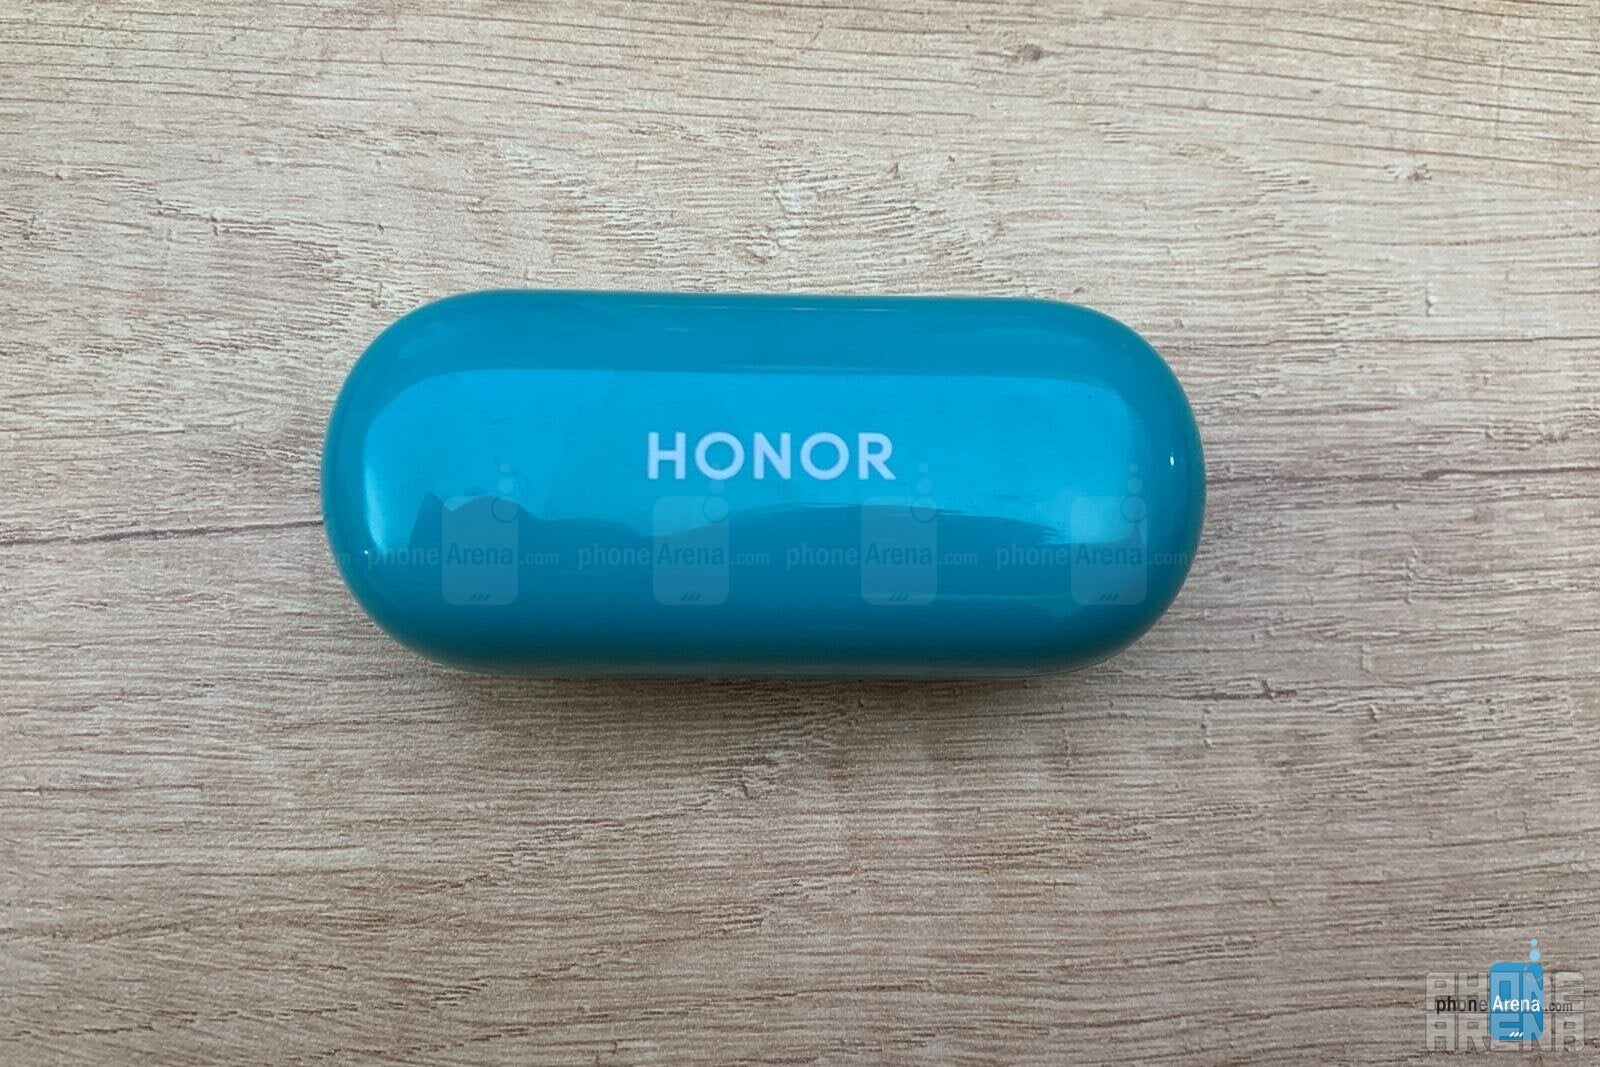 Honor Magic Earbuds: the latest AirPods clones come in teal